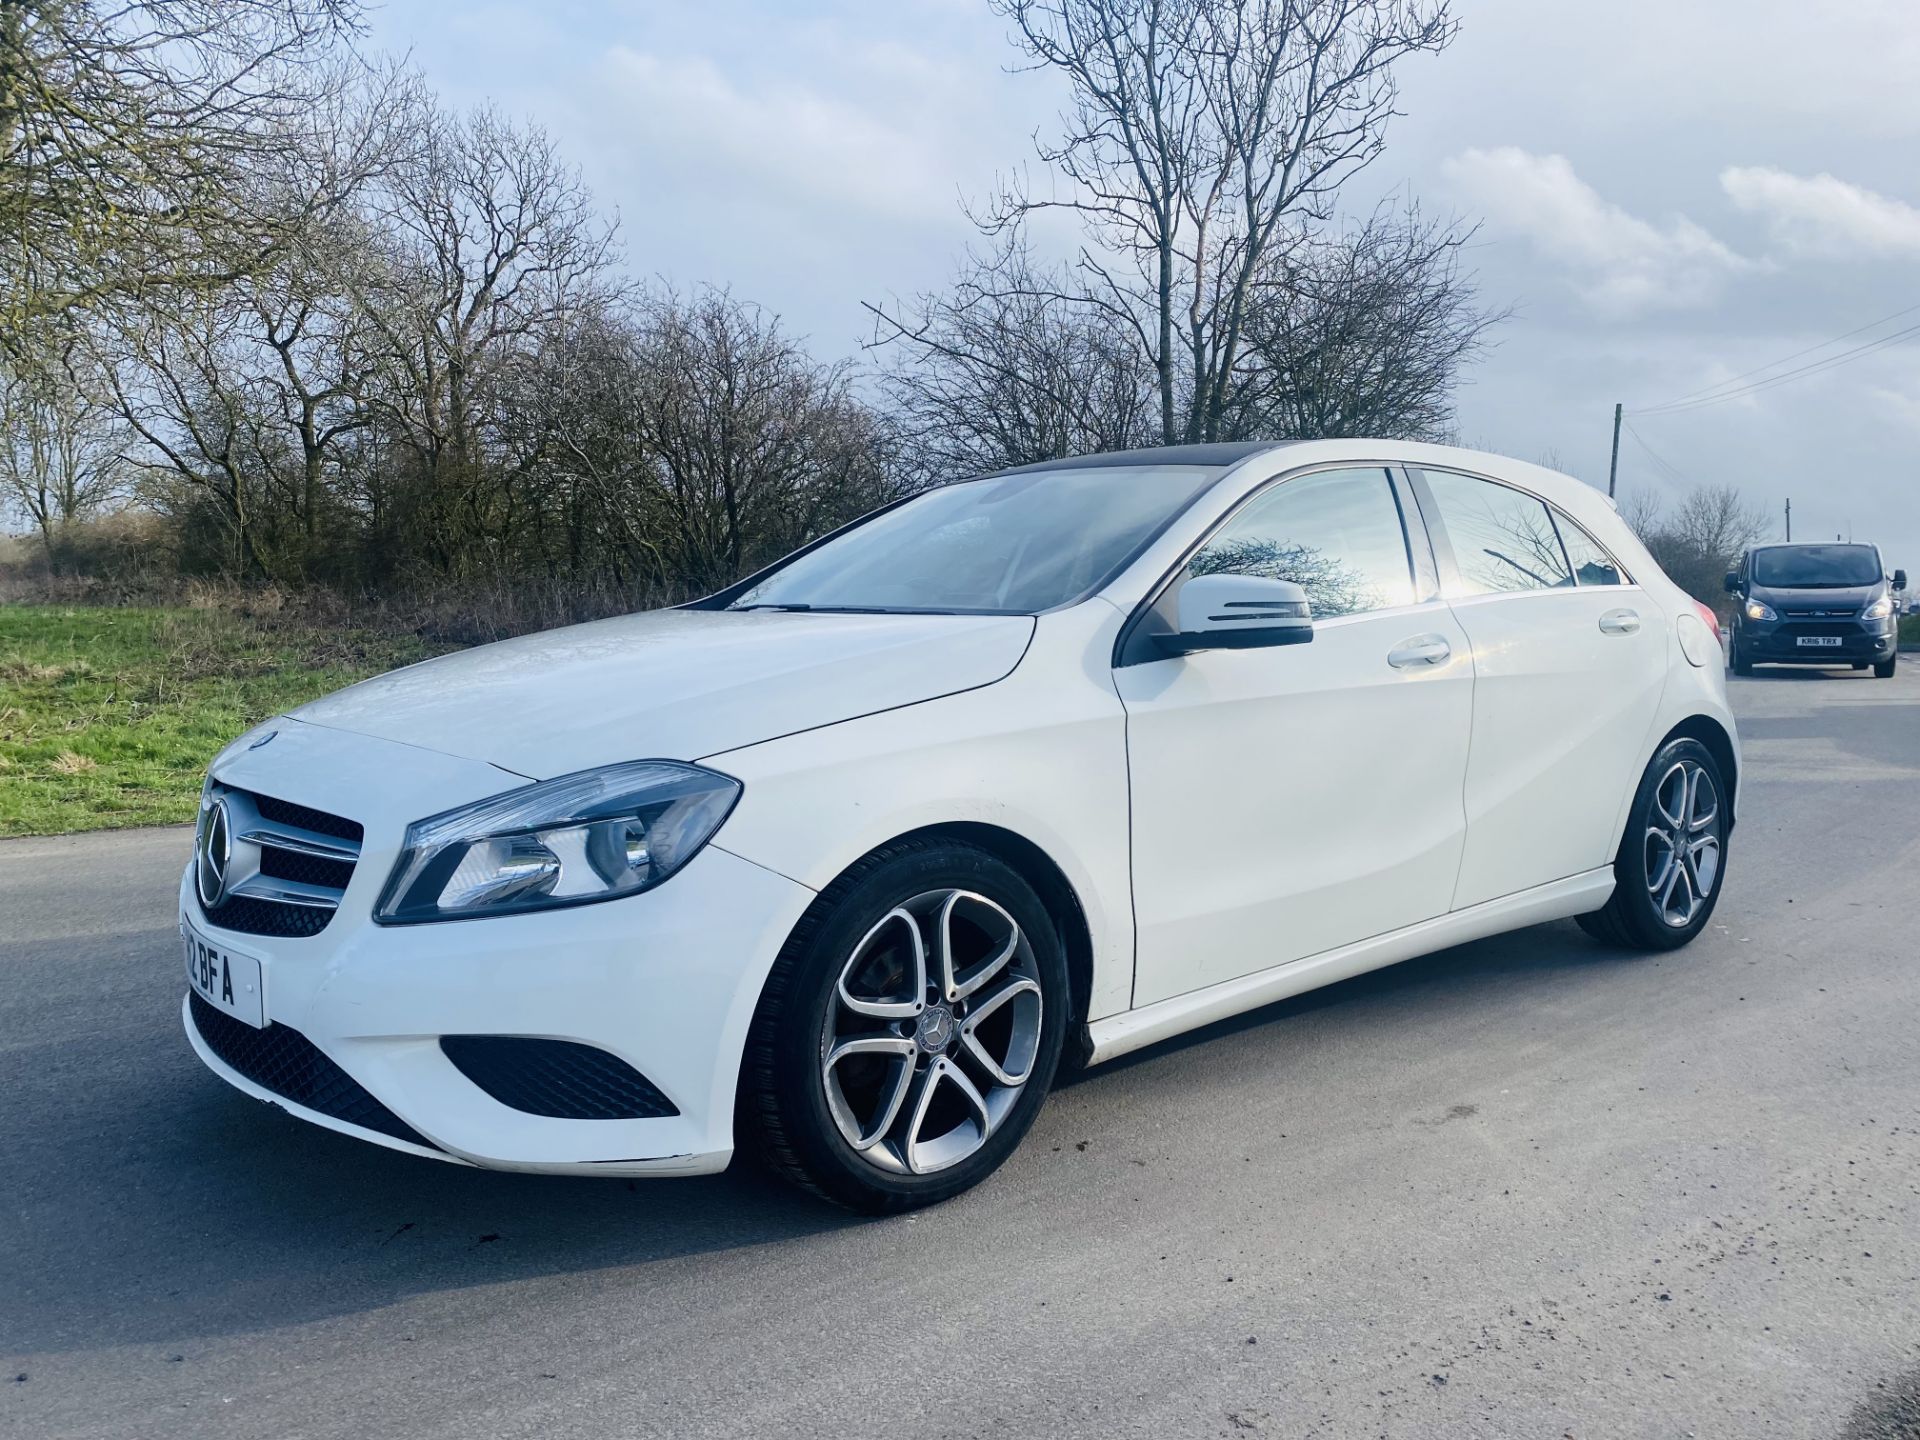 (ON SALE) MERCEDES A180d "SPORT" (13 REG) PRIVATE PLATE INCLUDED - AIR CON - ALLOYS (NO VAT)